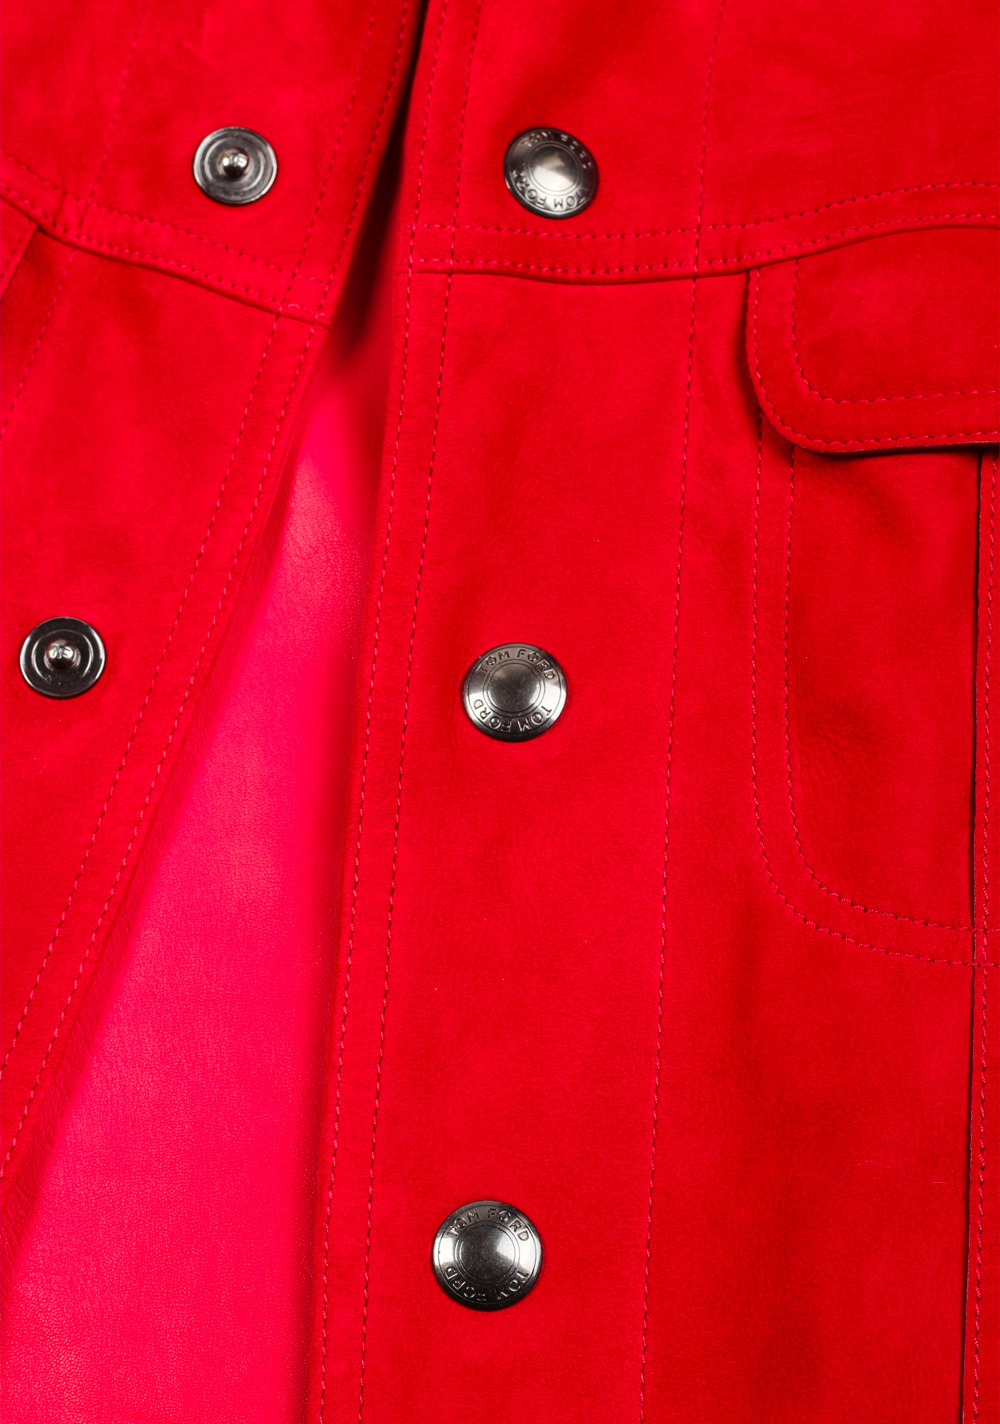 TOM FORD Red Western Jacket Coat Size 48 / 38R U.S. | Costume Limité